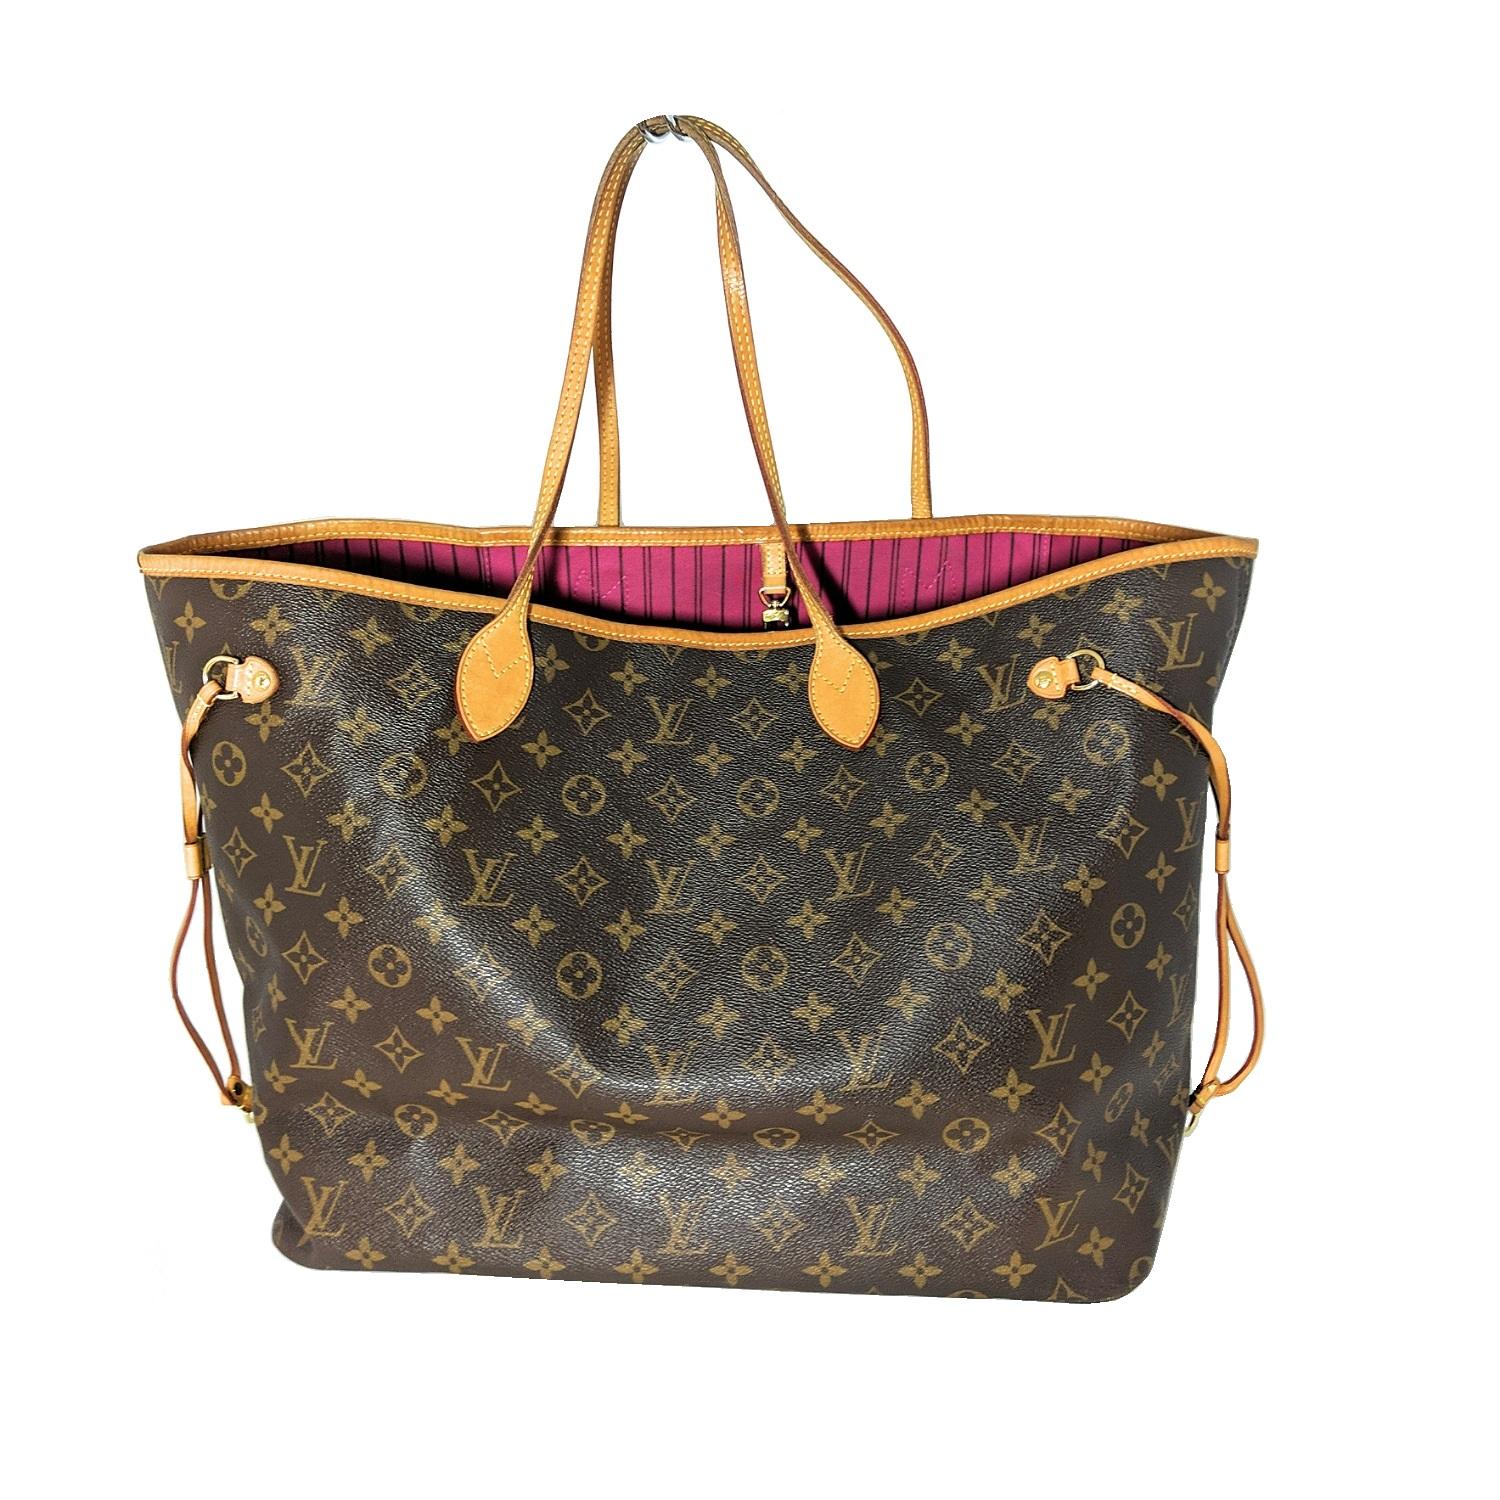 The Neverfull GM tote unites timeless design with heritage details. Made from supple Monogram canvas with natural cowhide trim, it is ultra-roomy but never bulky, with side laces that cinch for a sleek allure or loosen for a more casual look. Slim,